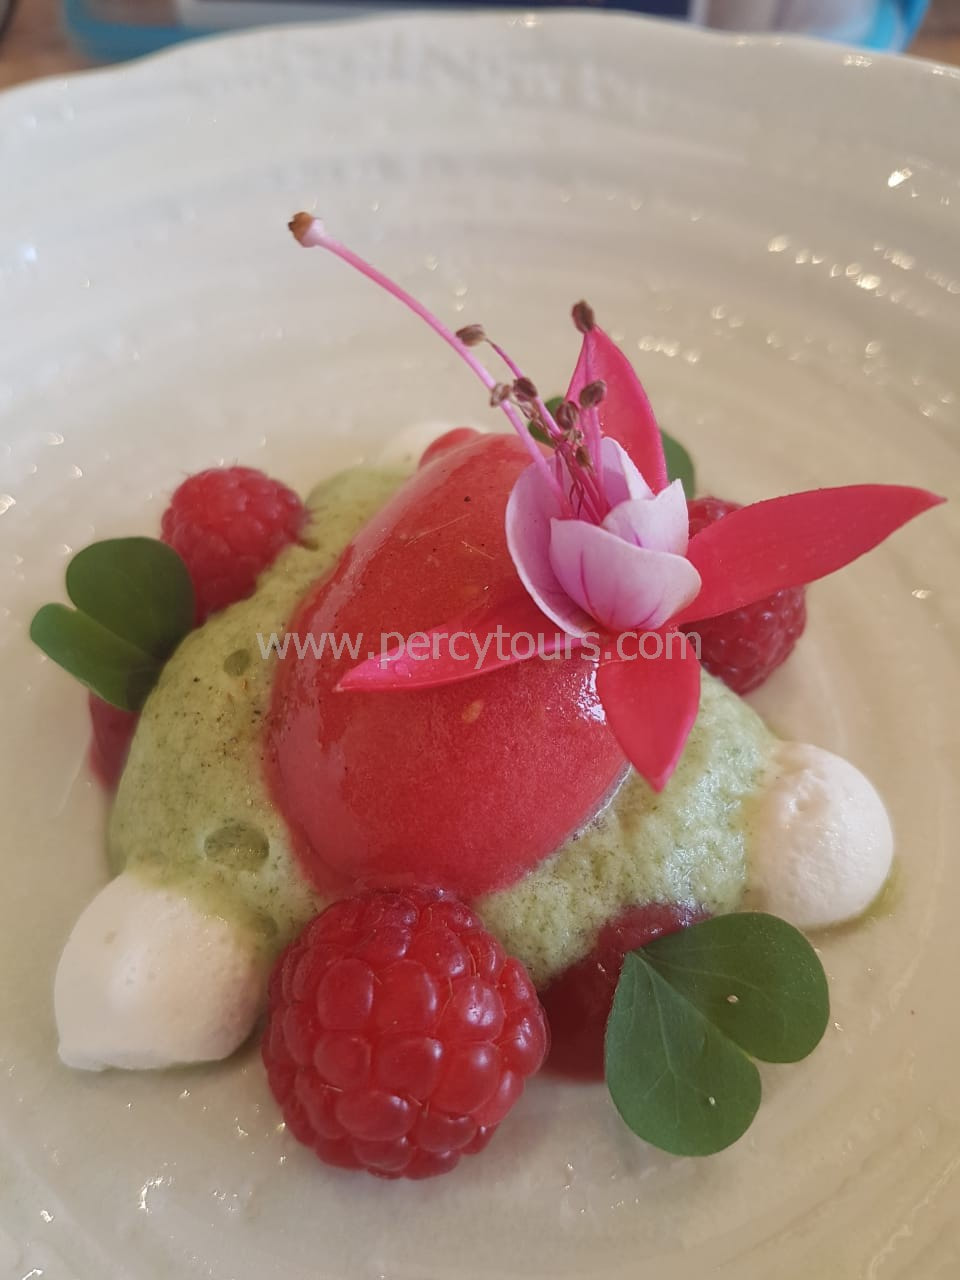 Raspberry and mint sorbet, Hermanus restaurant, near Cape Town, South Africa